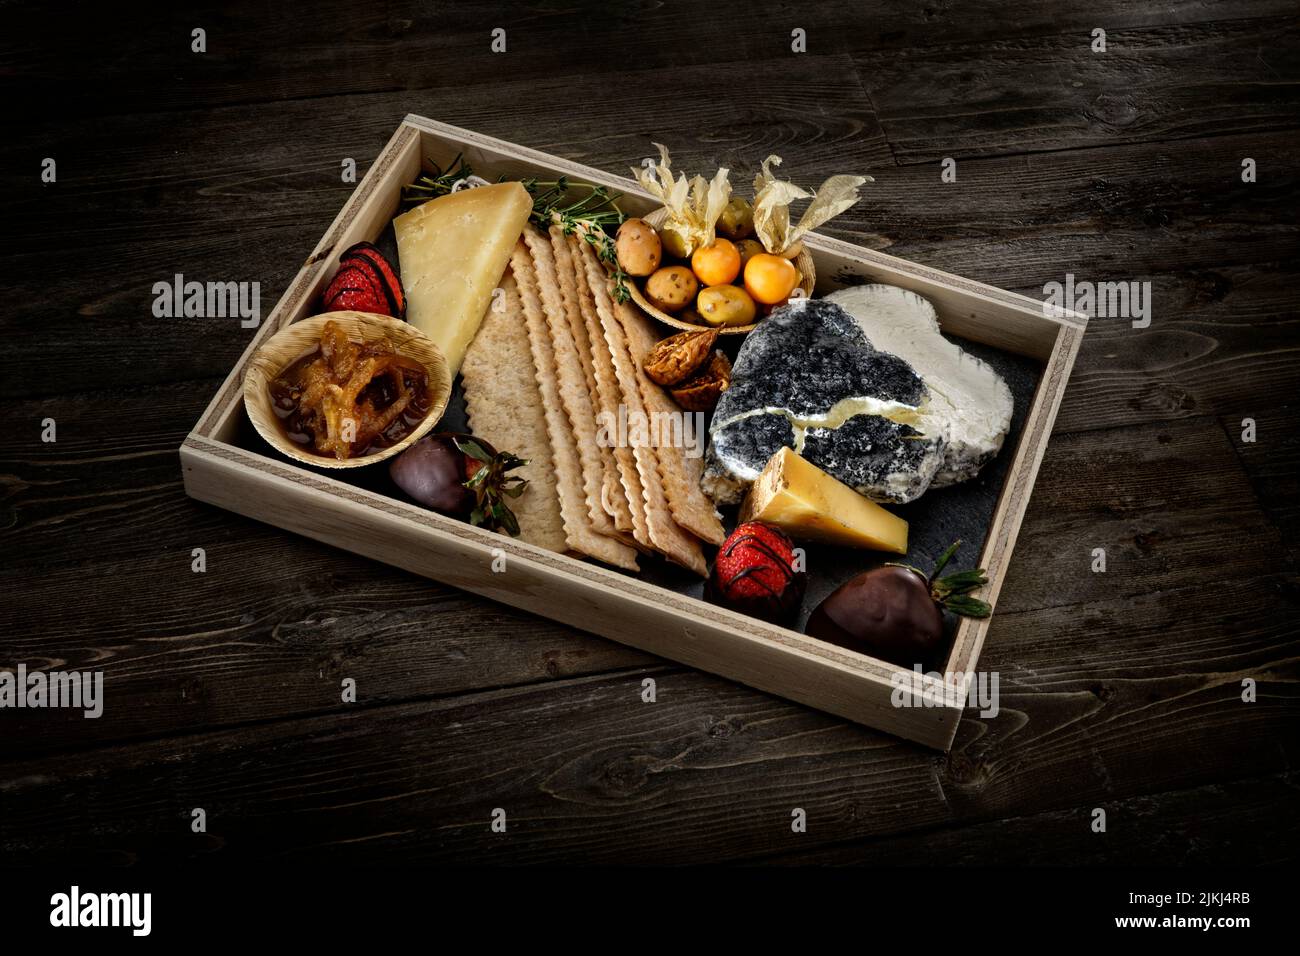 A delicious Charcuterie board with cheese, crackers, and cured meats Stock Photo